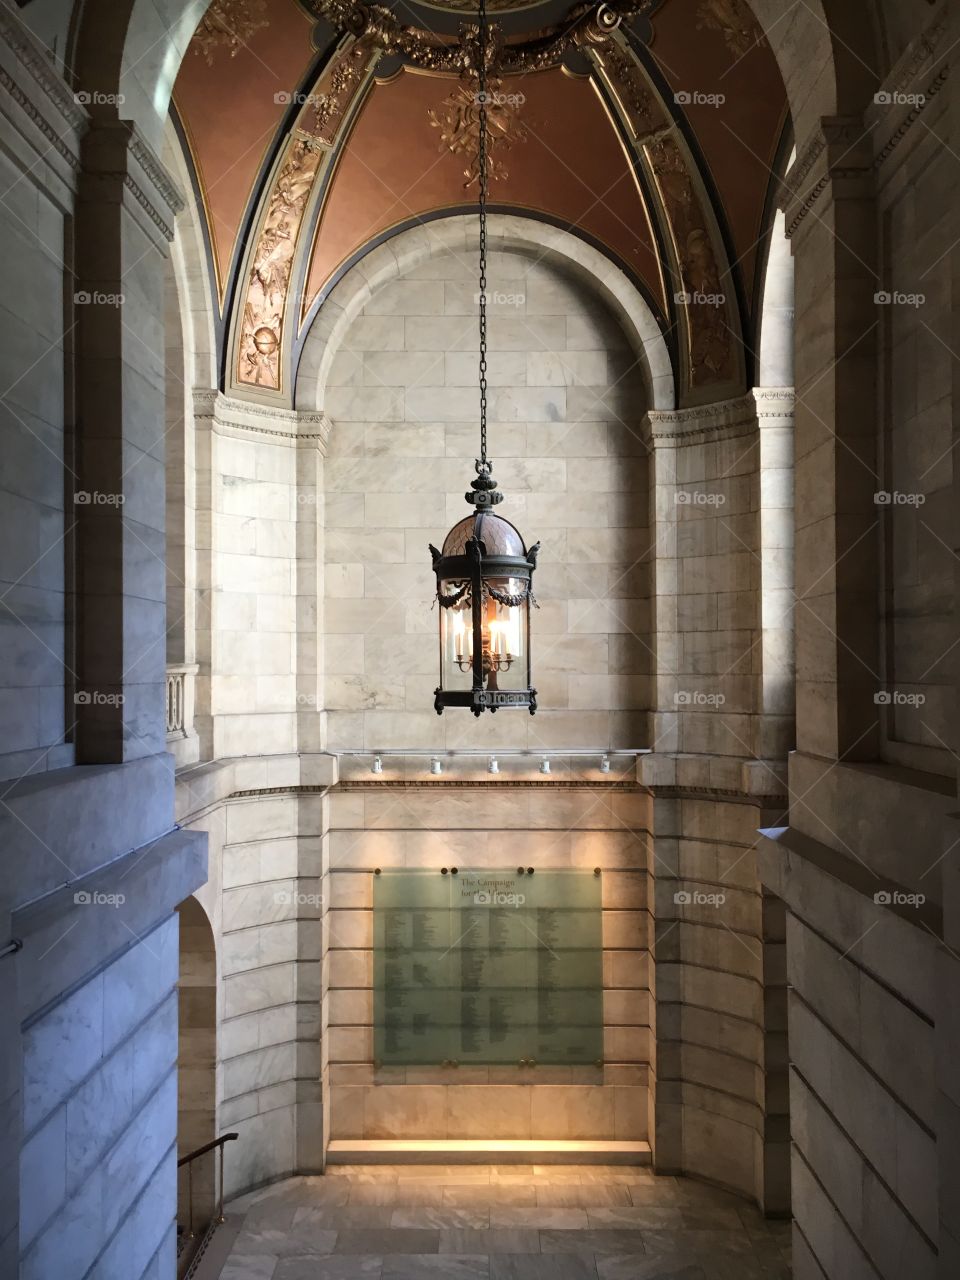 Design and Beautiful Architecture of a New York Public Library in Manhattan in New York City in 2017